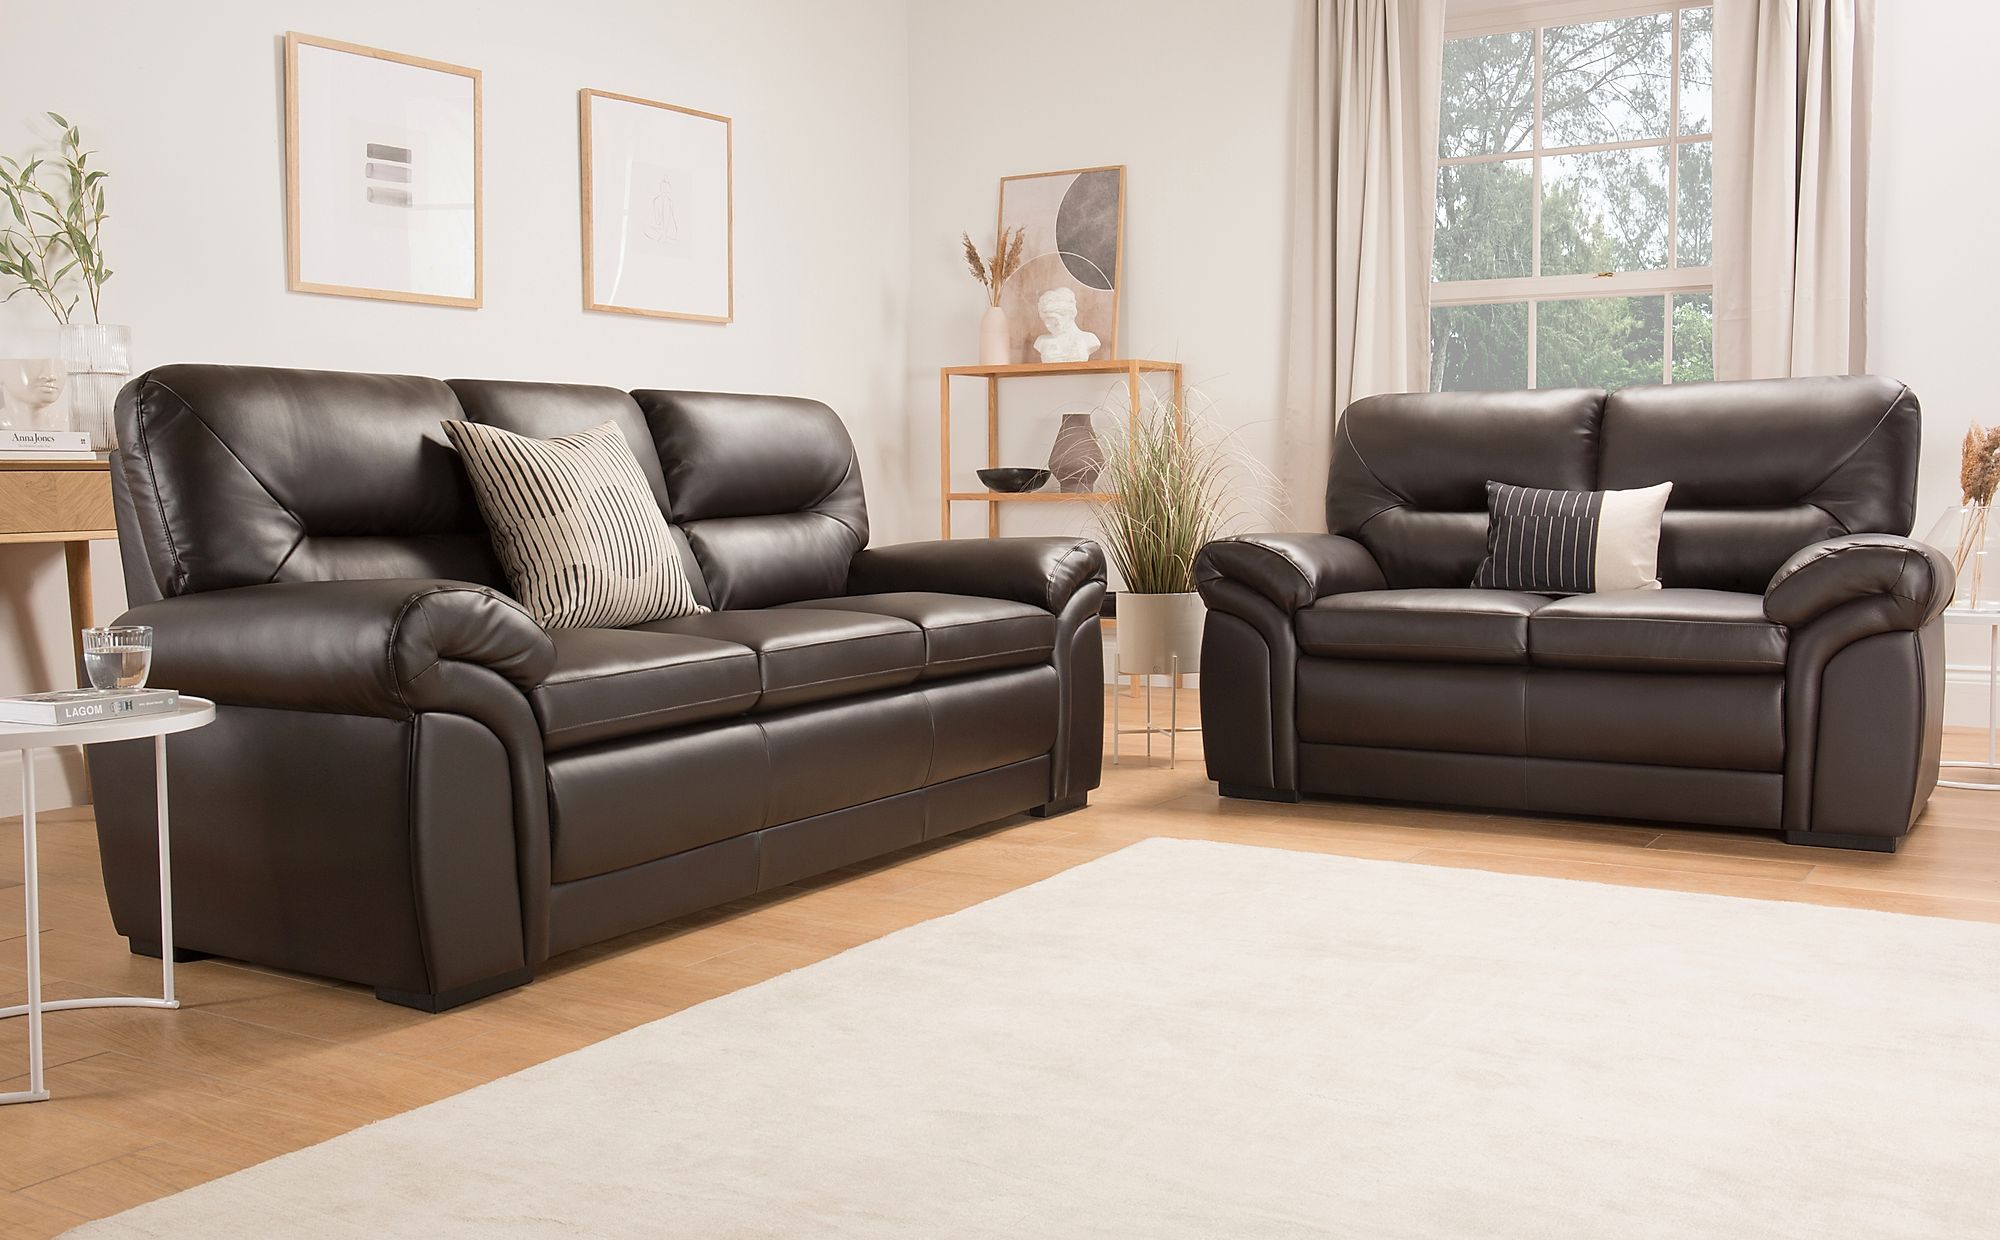 3 seater and 2 seater leather sofa deals